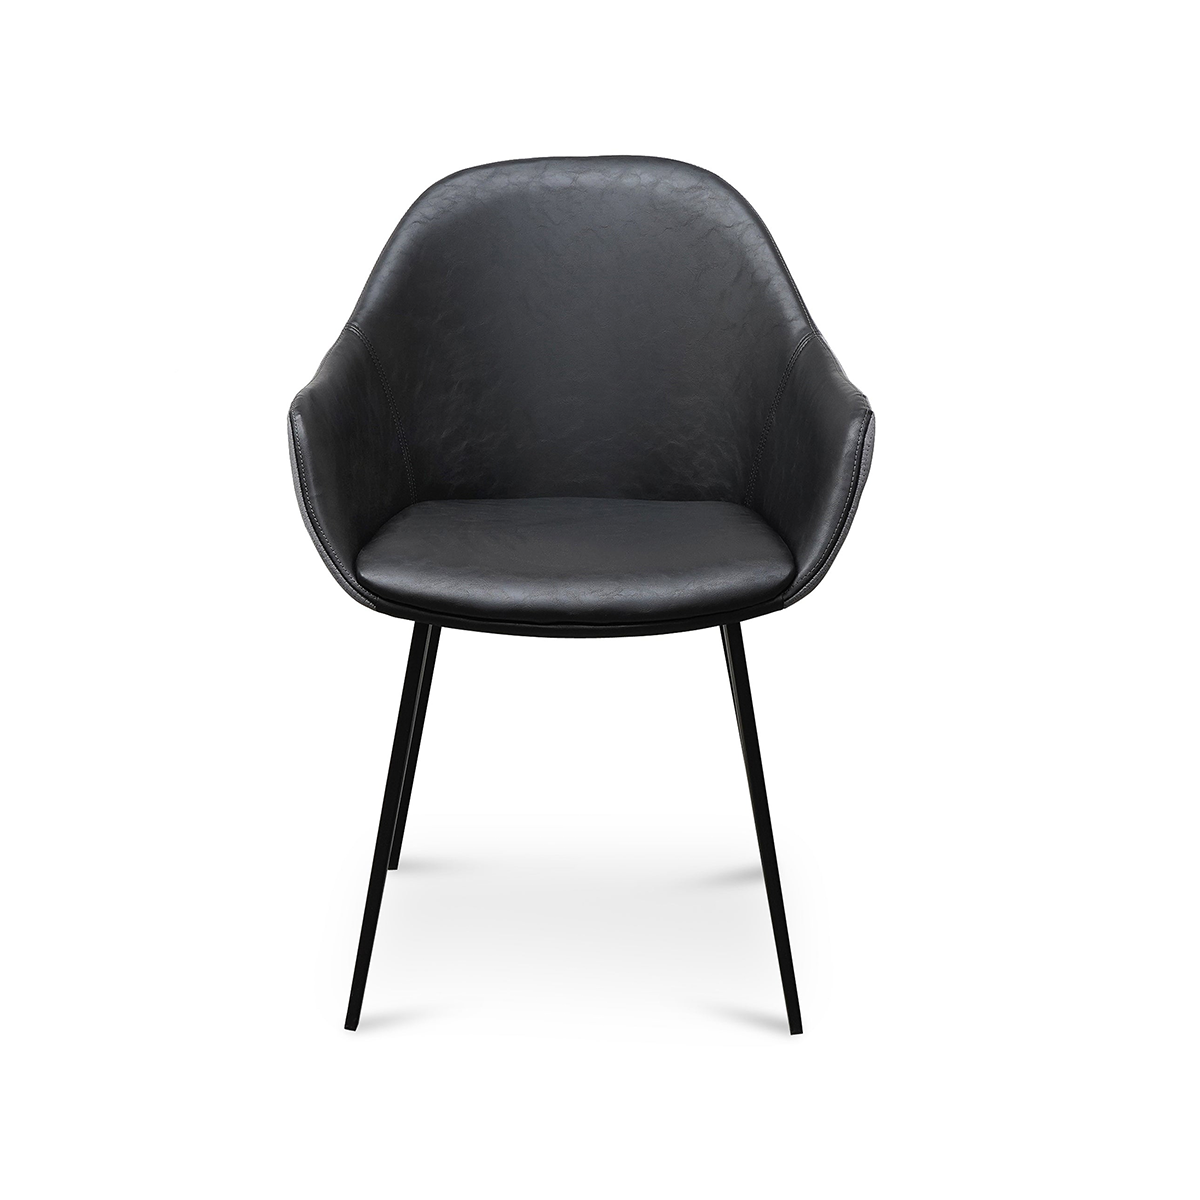 FondHouse Umoka- PU Leather Dining Chair - Antique Black - Charcoal Velvet